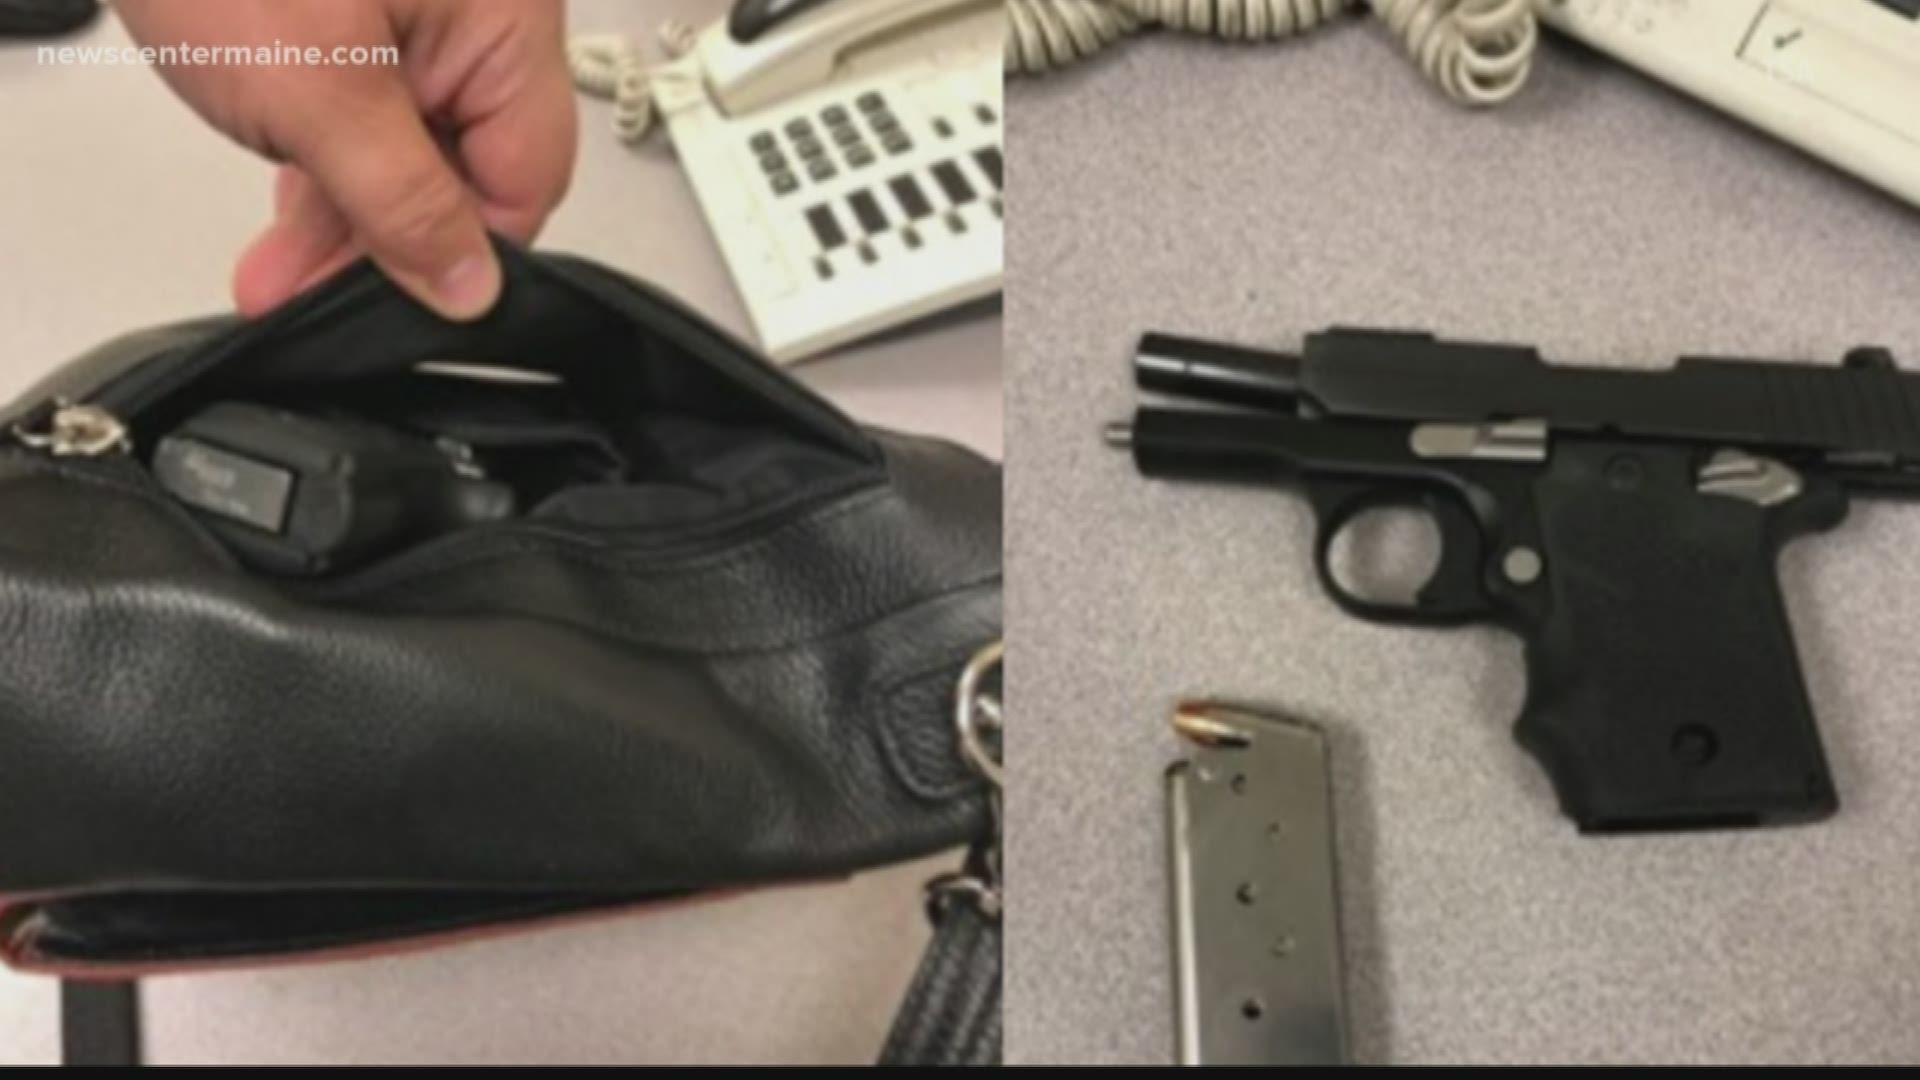 TSA officers caught a Maine woman with a loaded gun trying to board a plane in Portland on Wednesday, Oct. 30. It is the first gun they have confiscated in 2019.